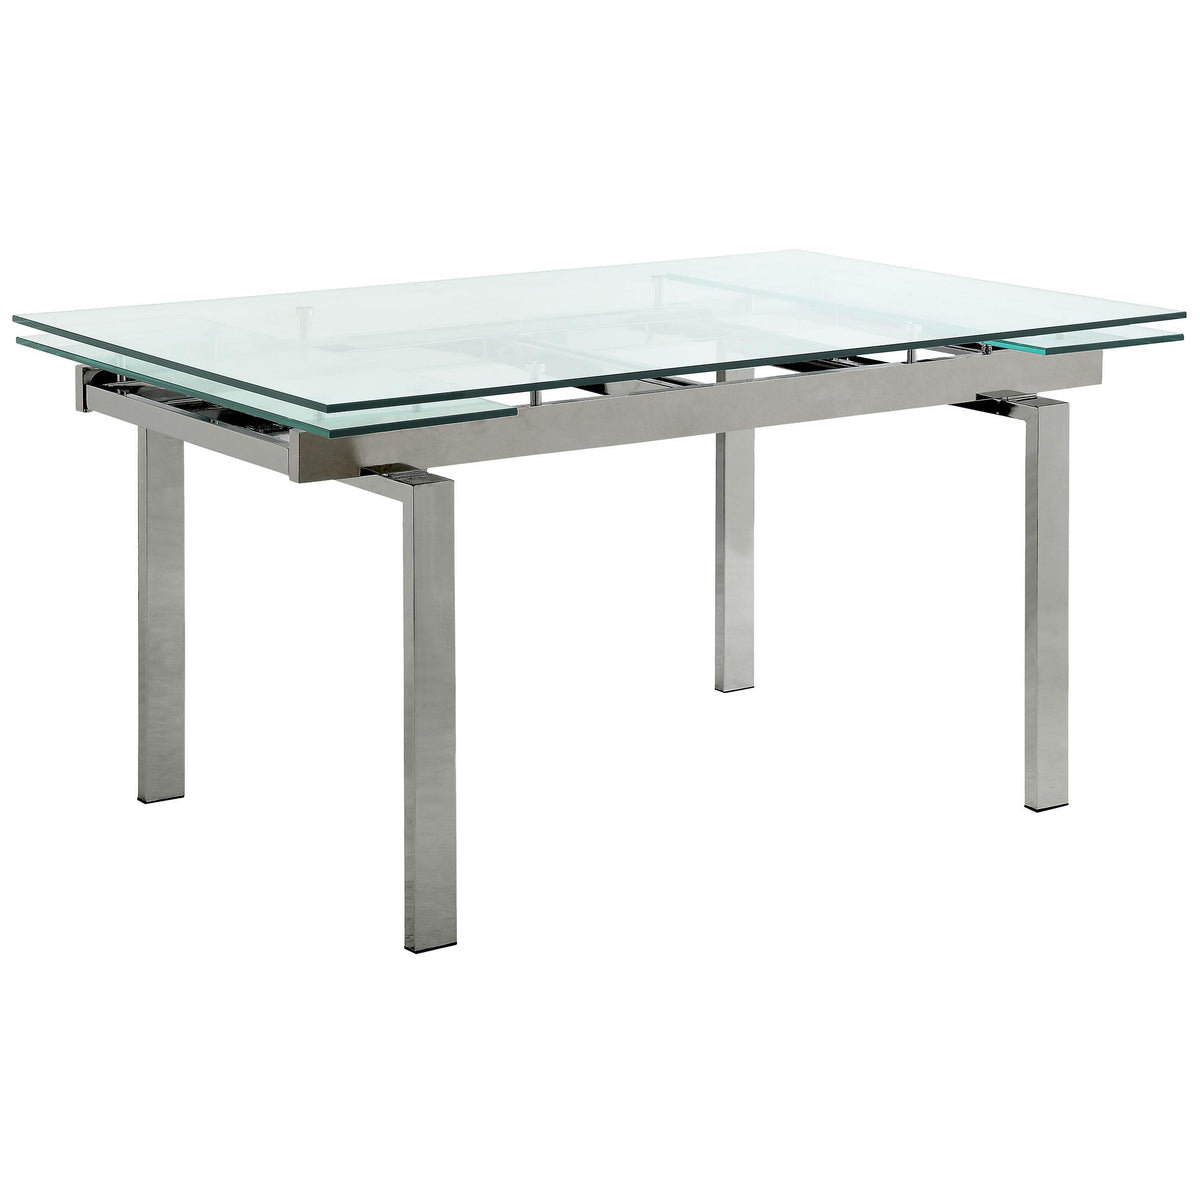 Wexford Glass Top Dining Table with Extension Leaves Chrome  Las Vegas Furniture Stores